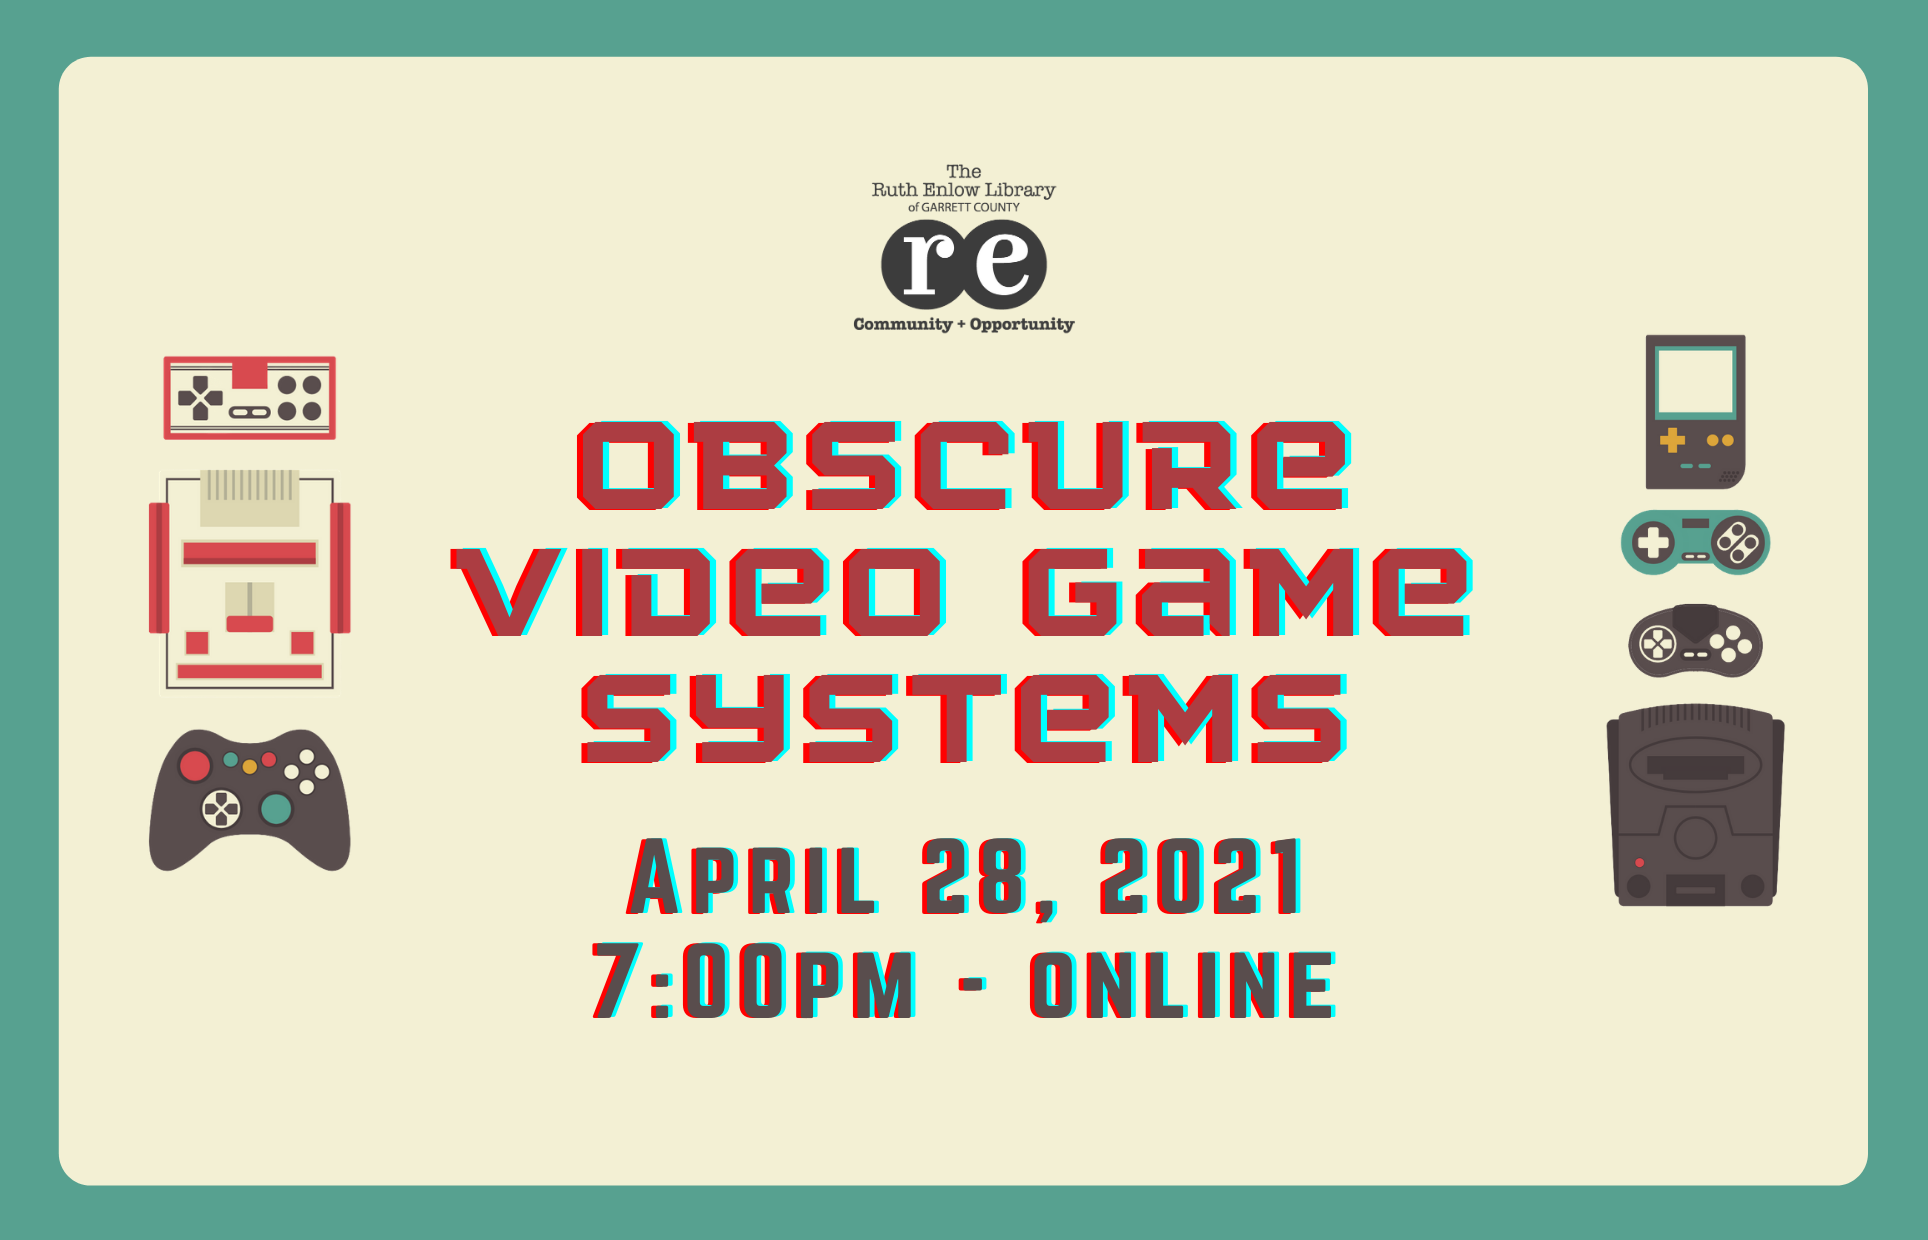 Obscure Video Game Systems Online Event